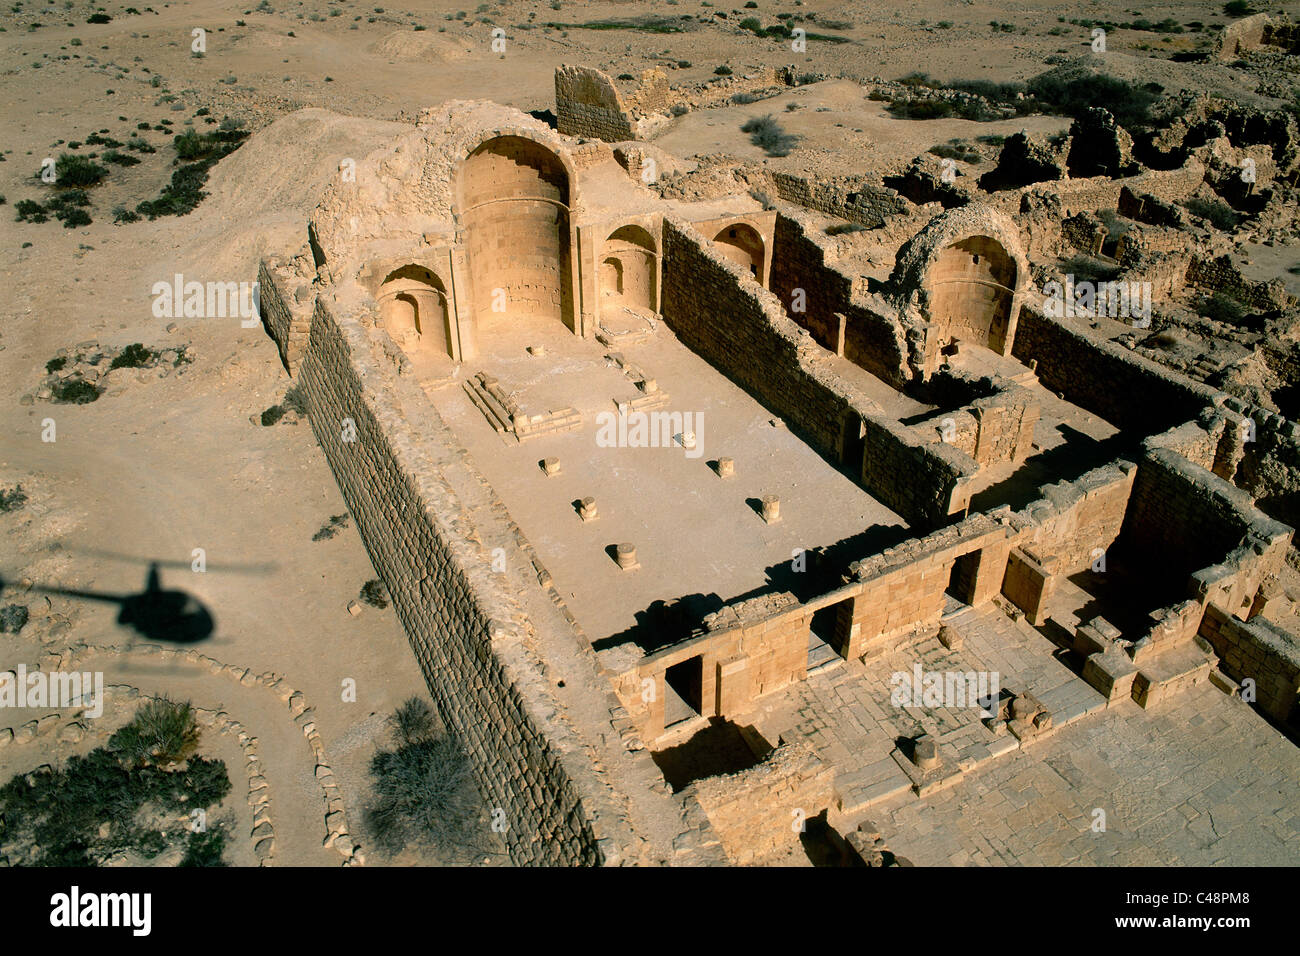 Aerial photograph of the ruins of the ancient city of Shivta in the central Negev desert Stock Photo